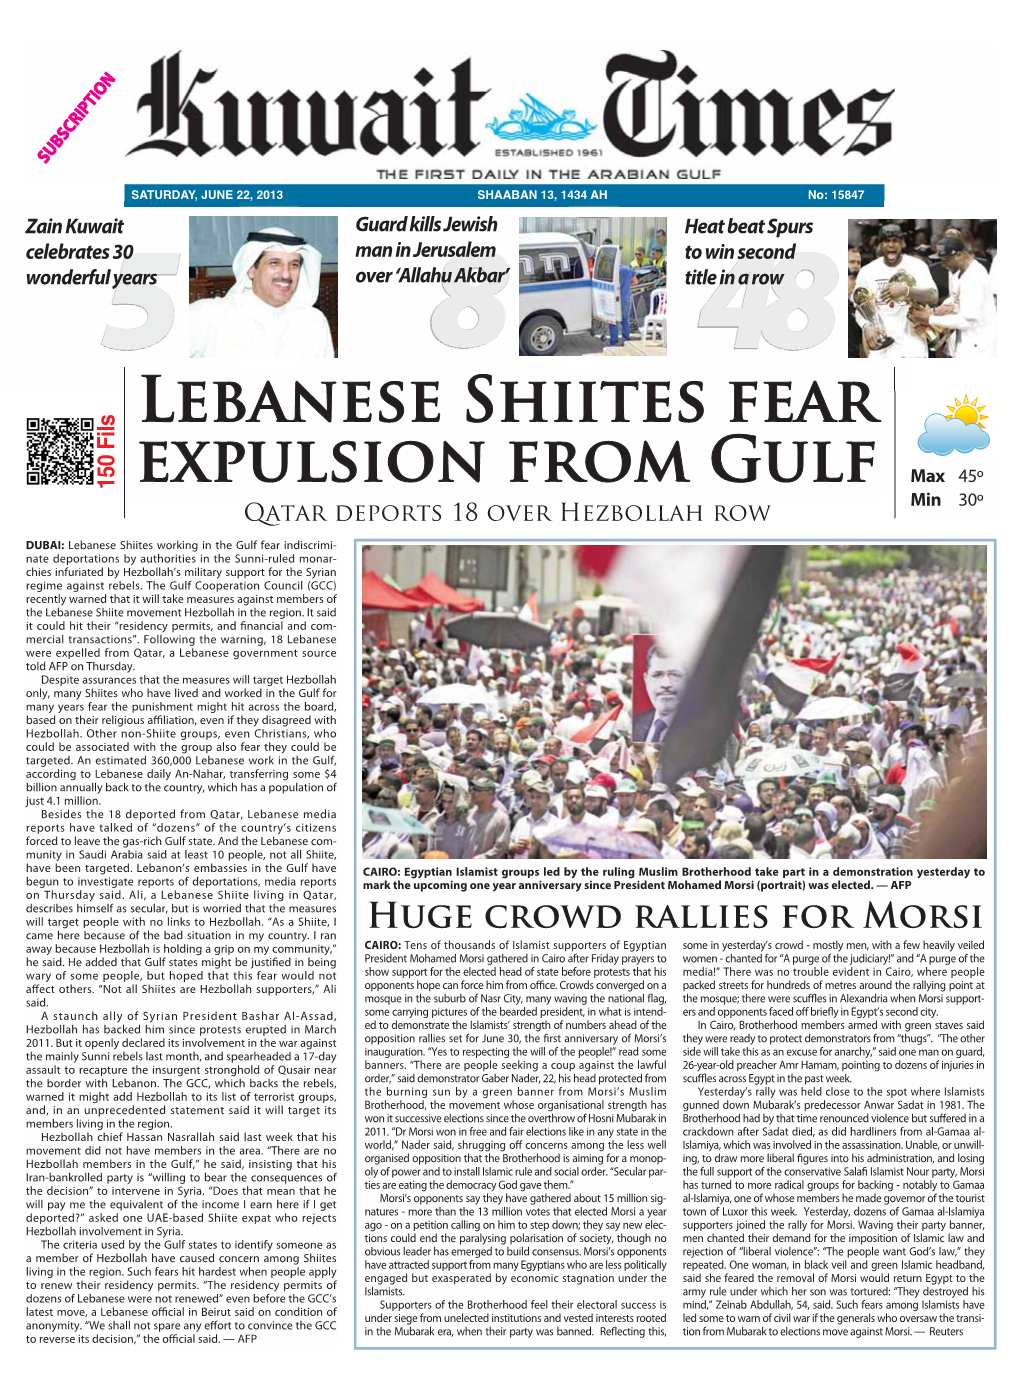 Lebanese Shiites FEAR Expulsion from Gulf